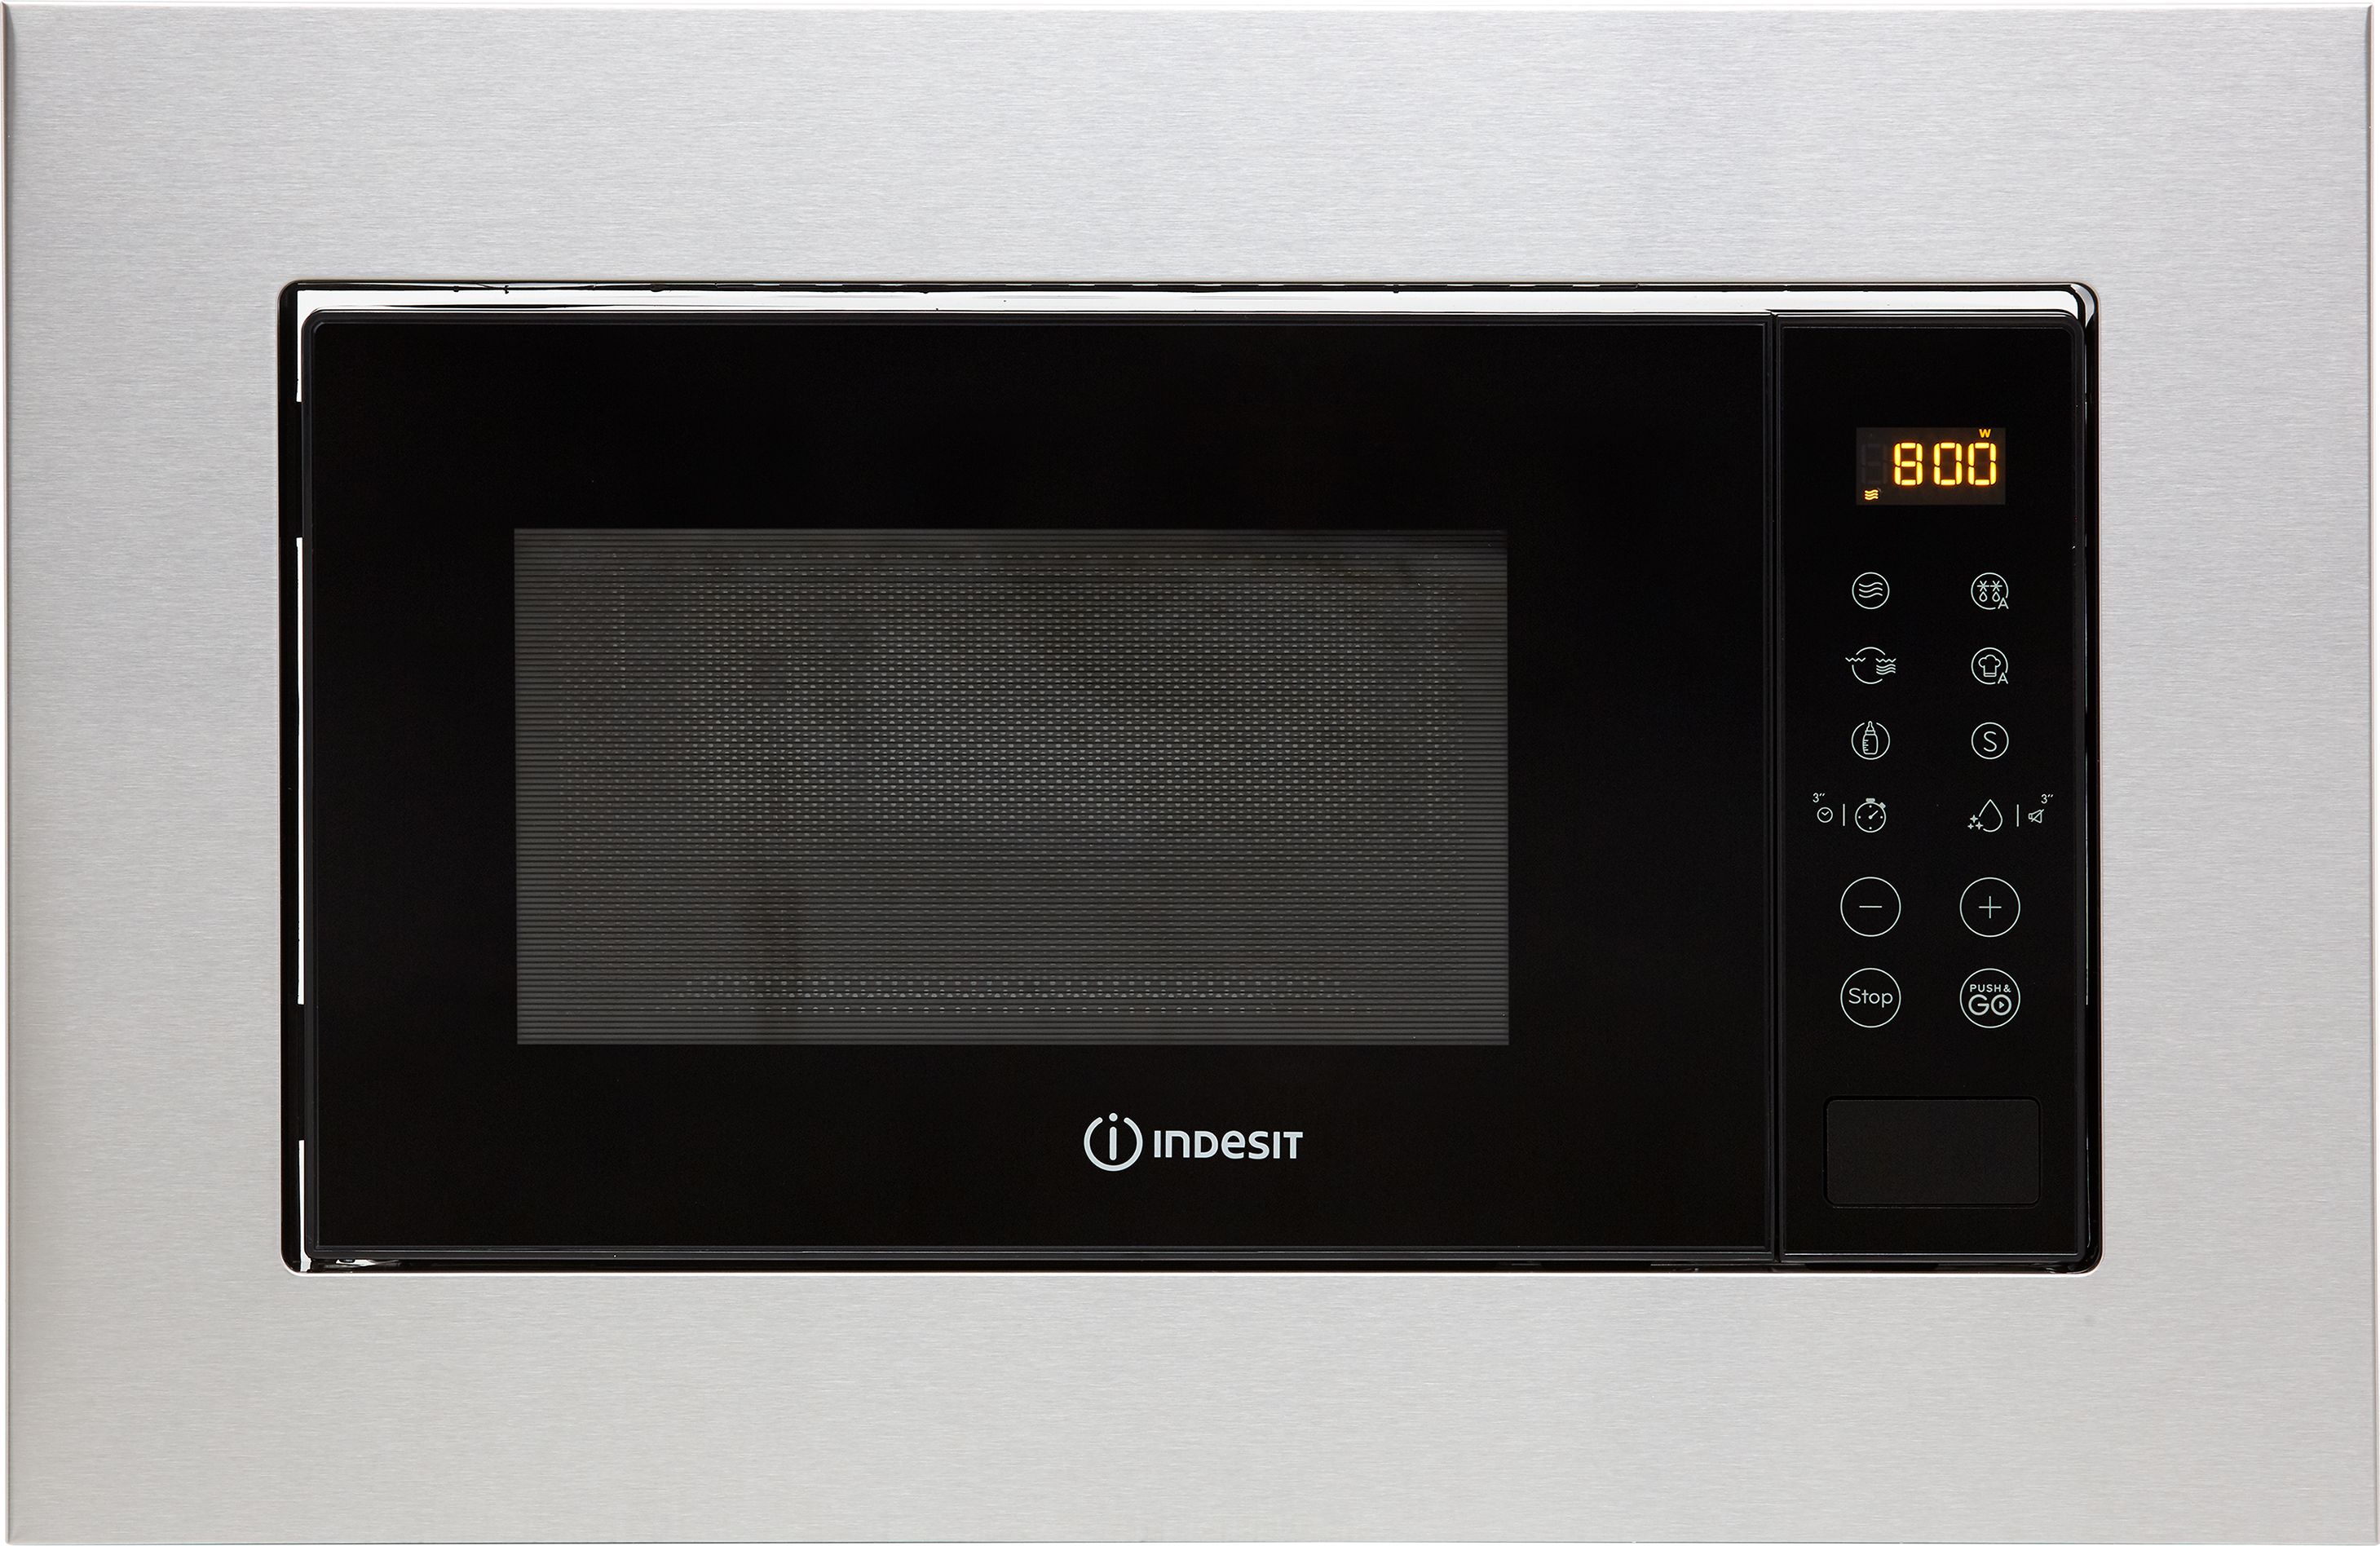 Indesit MWI120GXUK 39cm tall, 59cm wide, Built In Compact Microwave - Stainless Steel, Stainless Steel